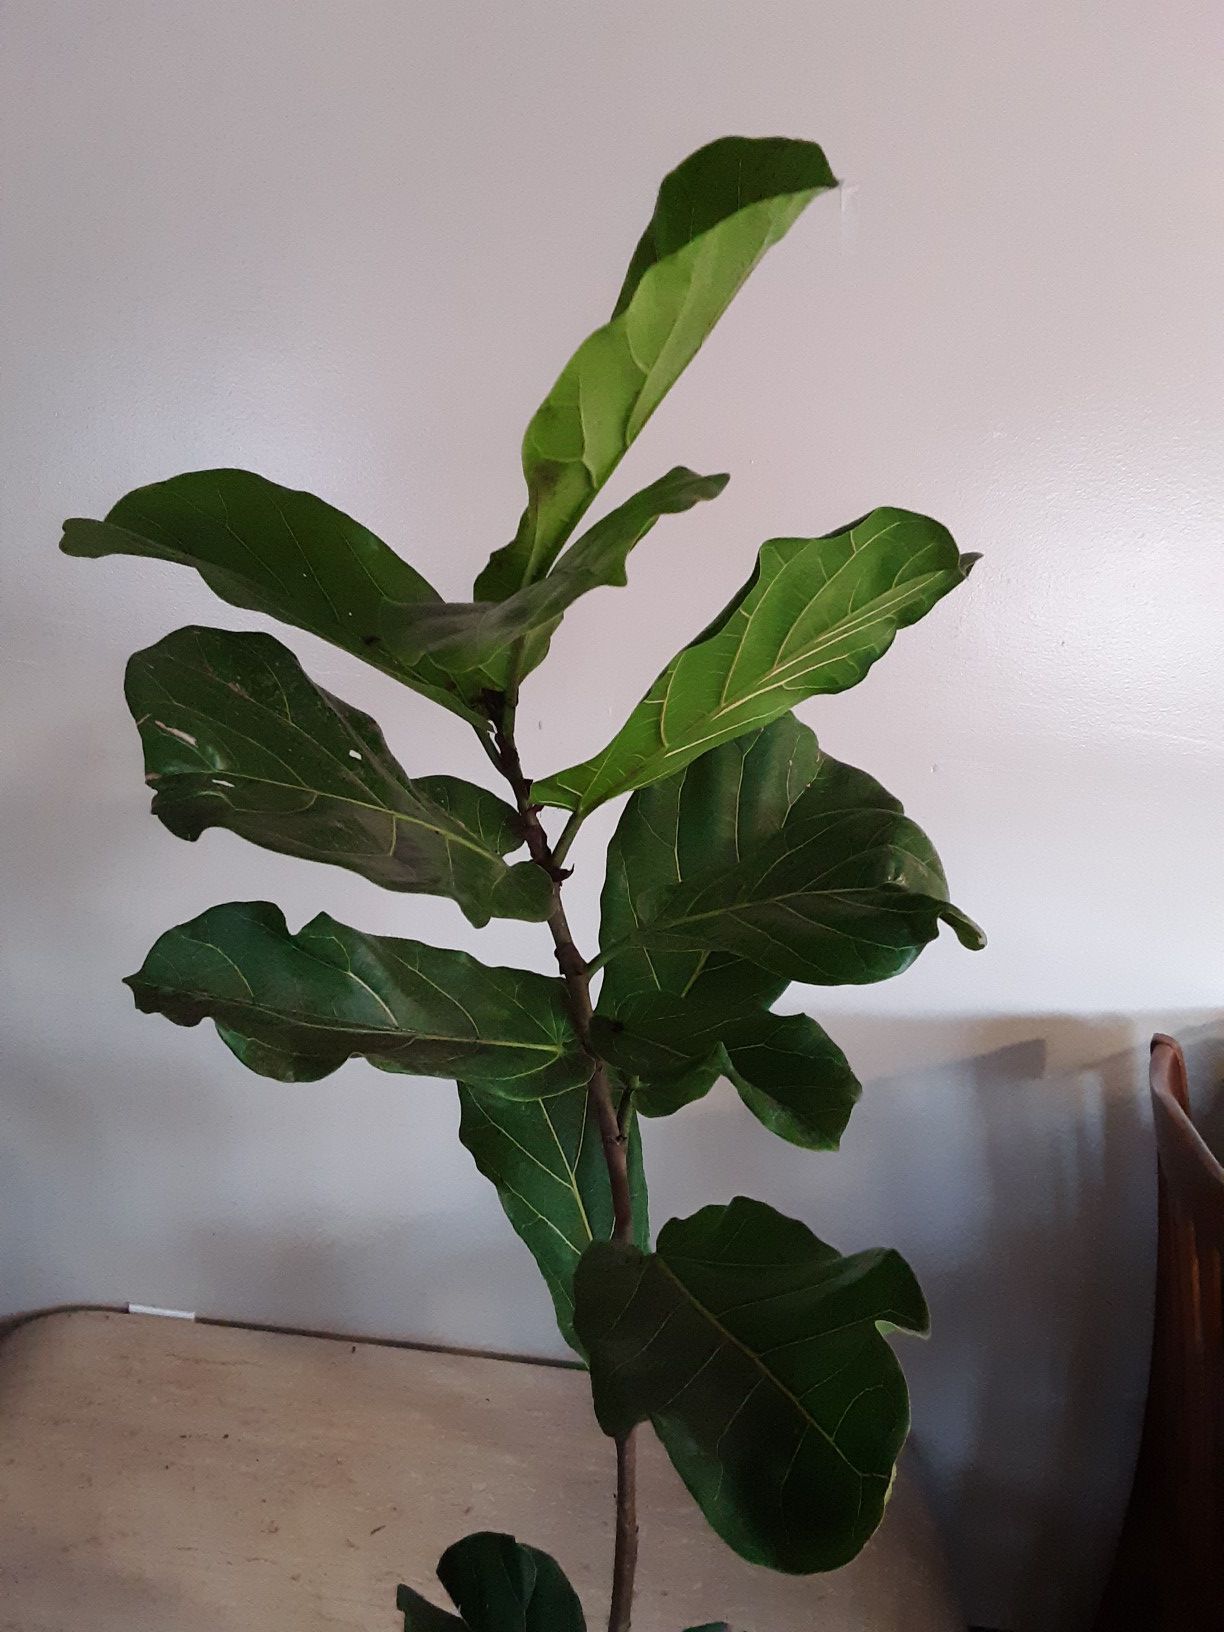 Fiddle leaf fig plants 3 gallons pot 5ft 4 inches tall $35